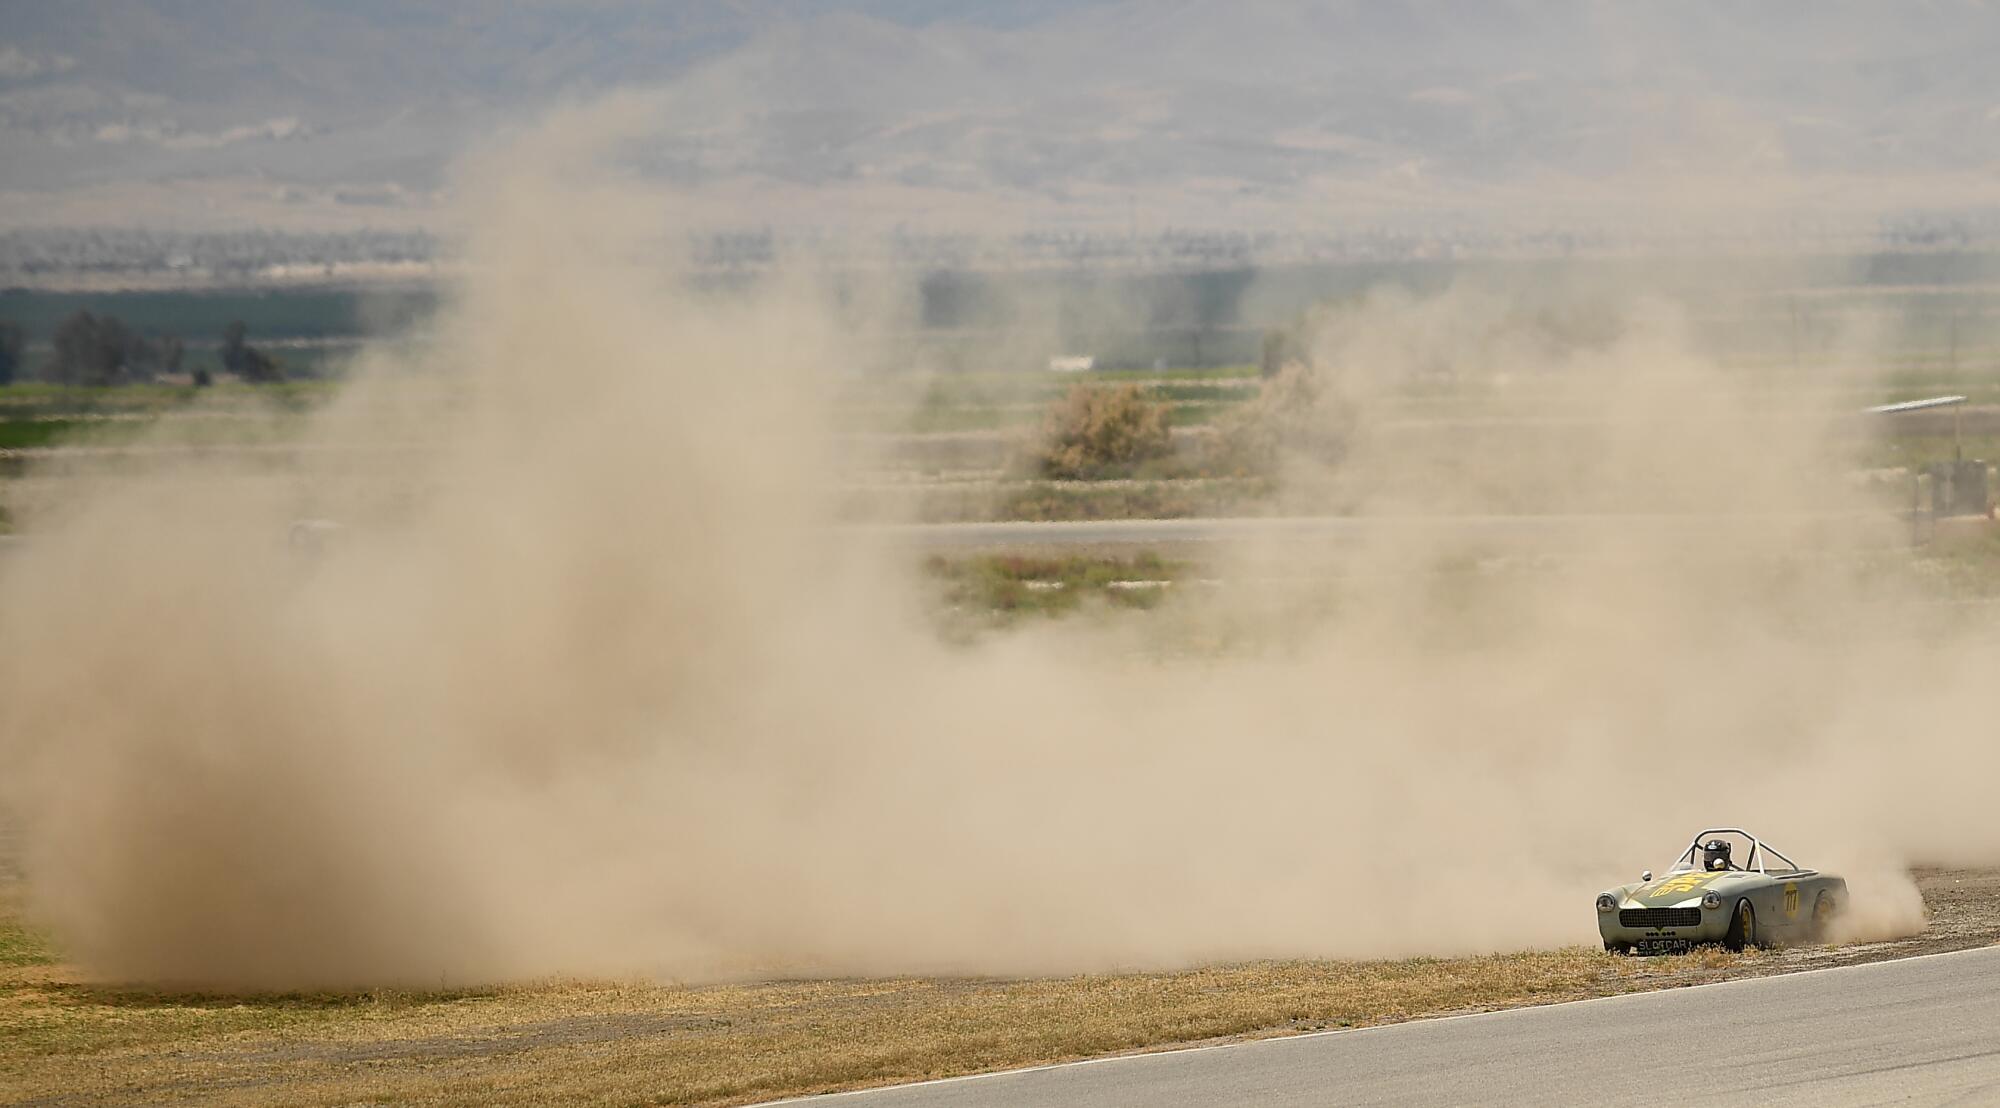 A race car loses control during a race at Buttonwillow Raceway in Buttonwillow, Calif., on Saturday.